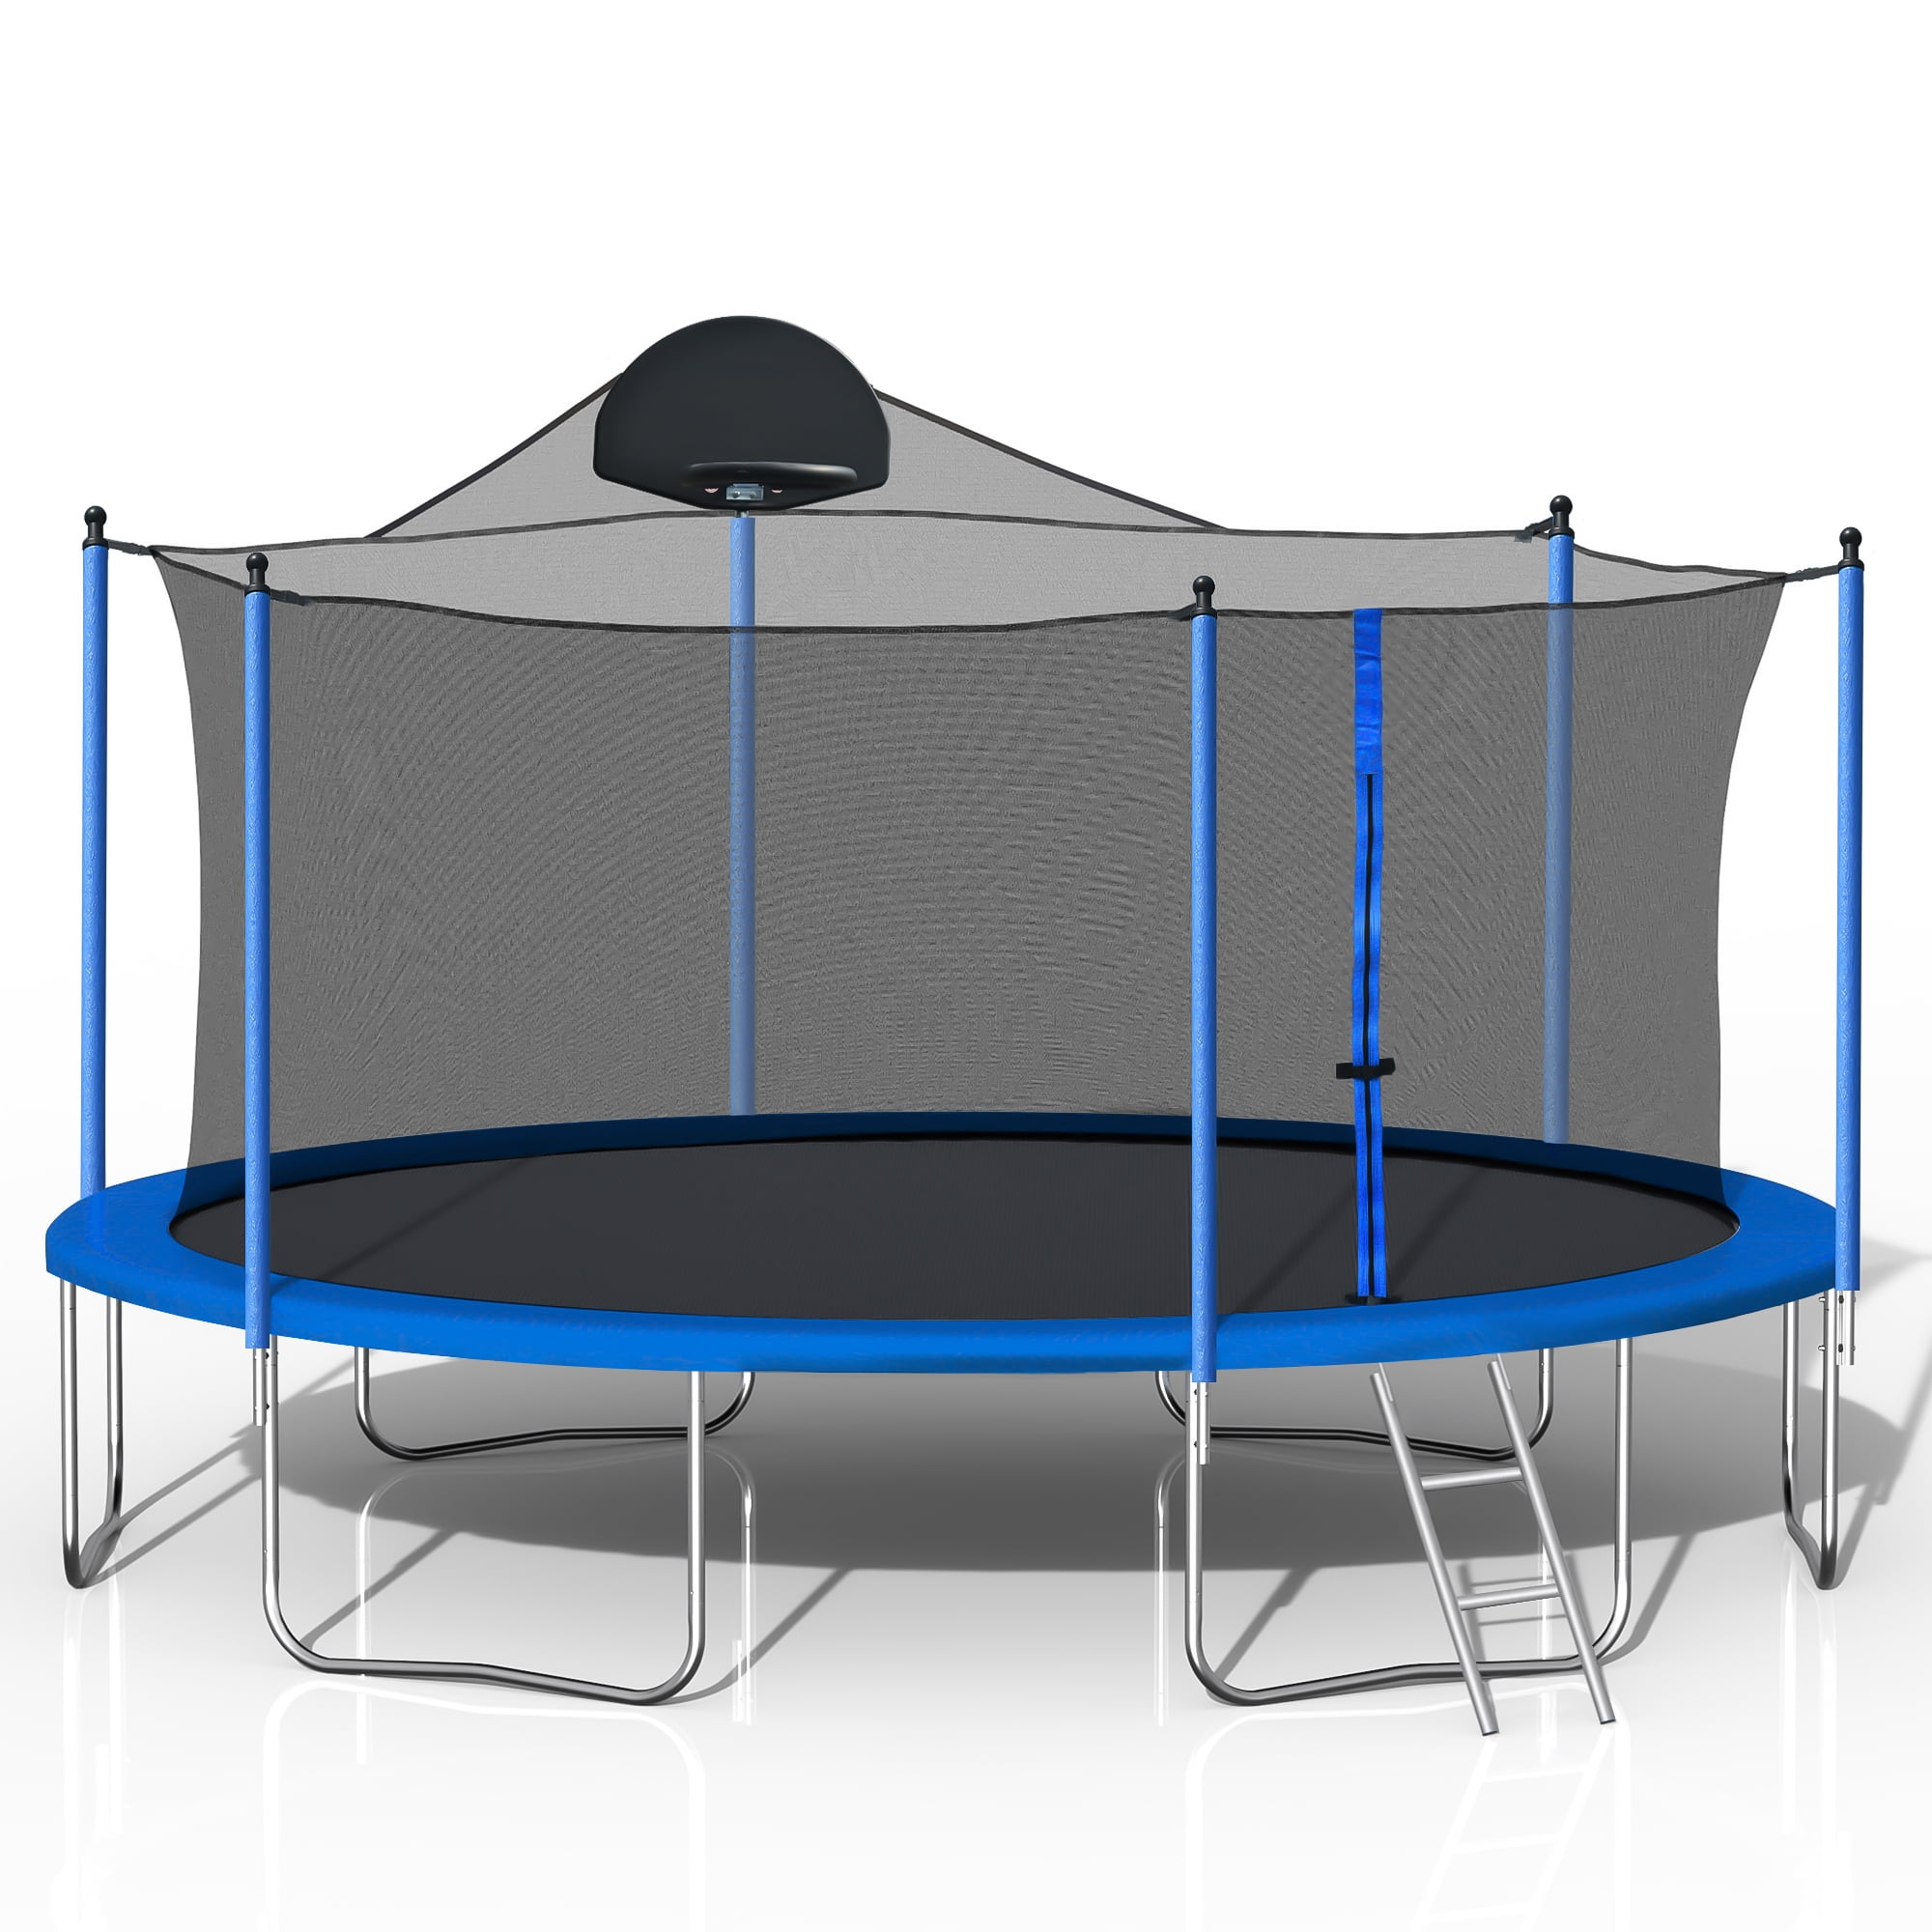 Trampoline with Enclosure on Clearance, New Upgraded 12 Feet Kids Outdoor Trampoline with Basketball Hoop and Ladder, Heavy Duty Round Trampoline for Indoor Backyard, LLL4568 -